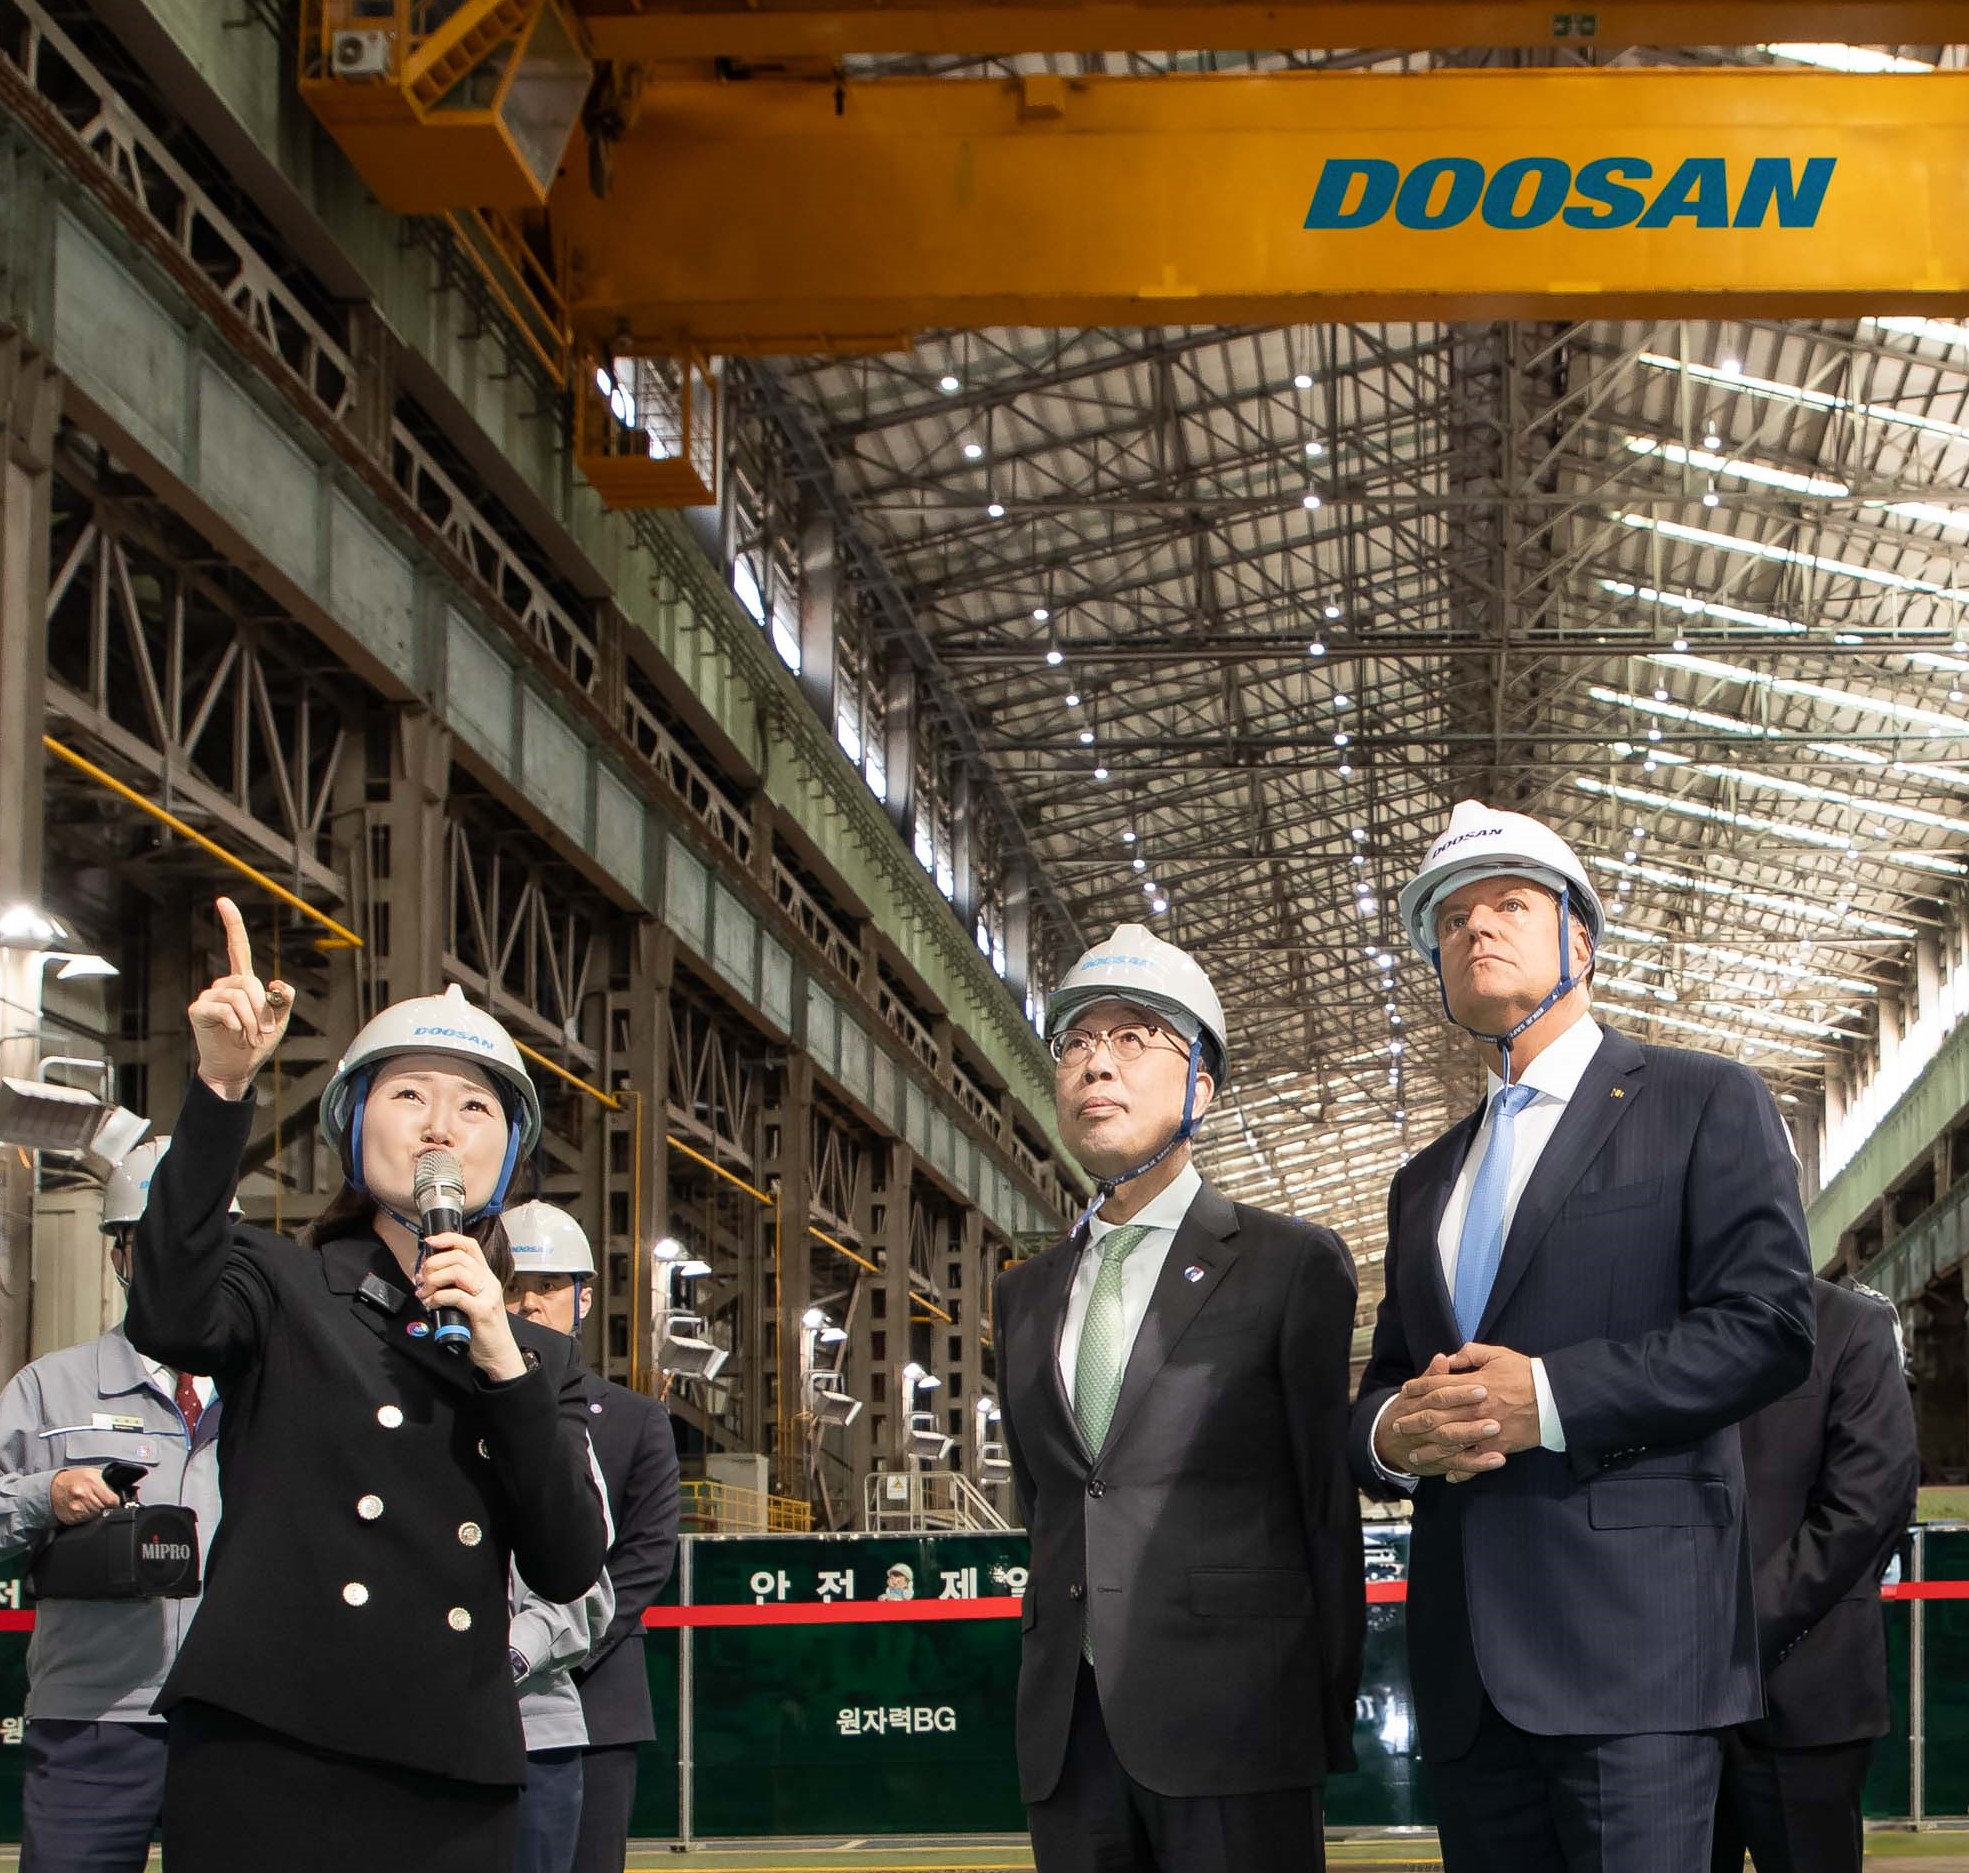 Romanian President Klaus Iohannis (on the right) touring the SMR manufacturing facility with Doosan Enerbility Chairman Geewon Park(in the middle) during his visit to the company’s Changwon headquarters on April 24.